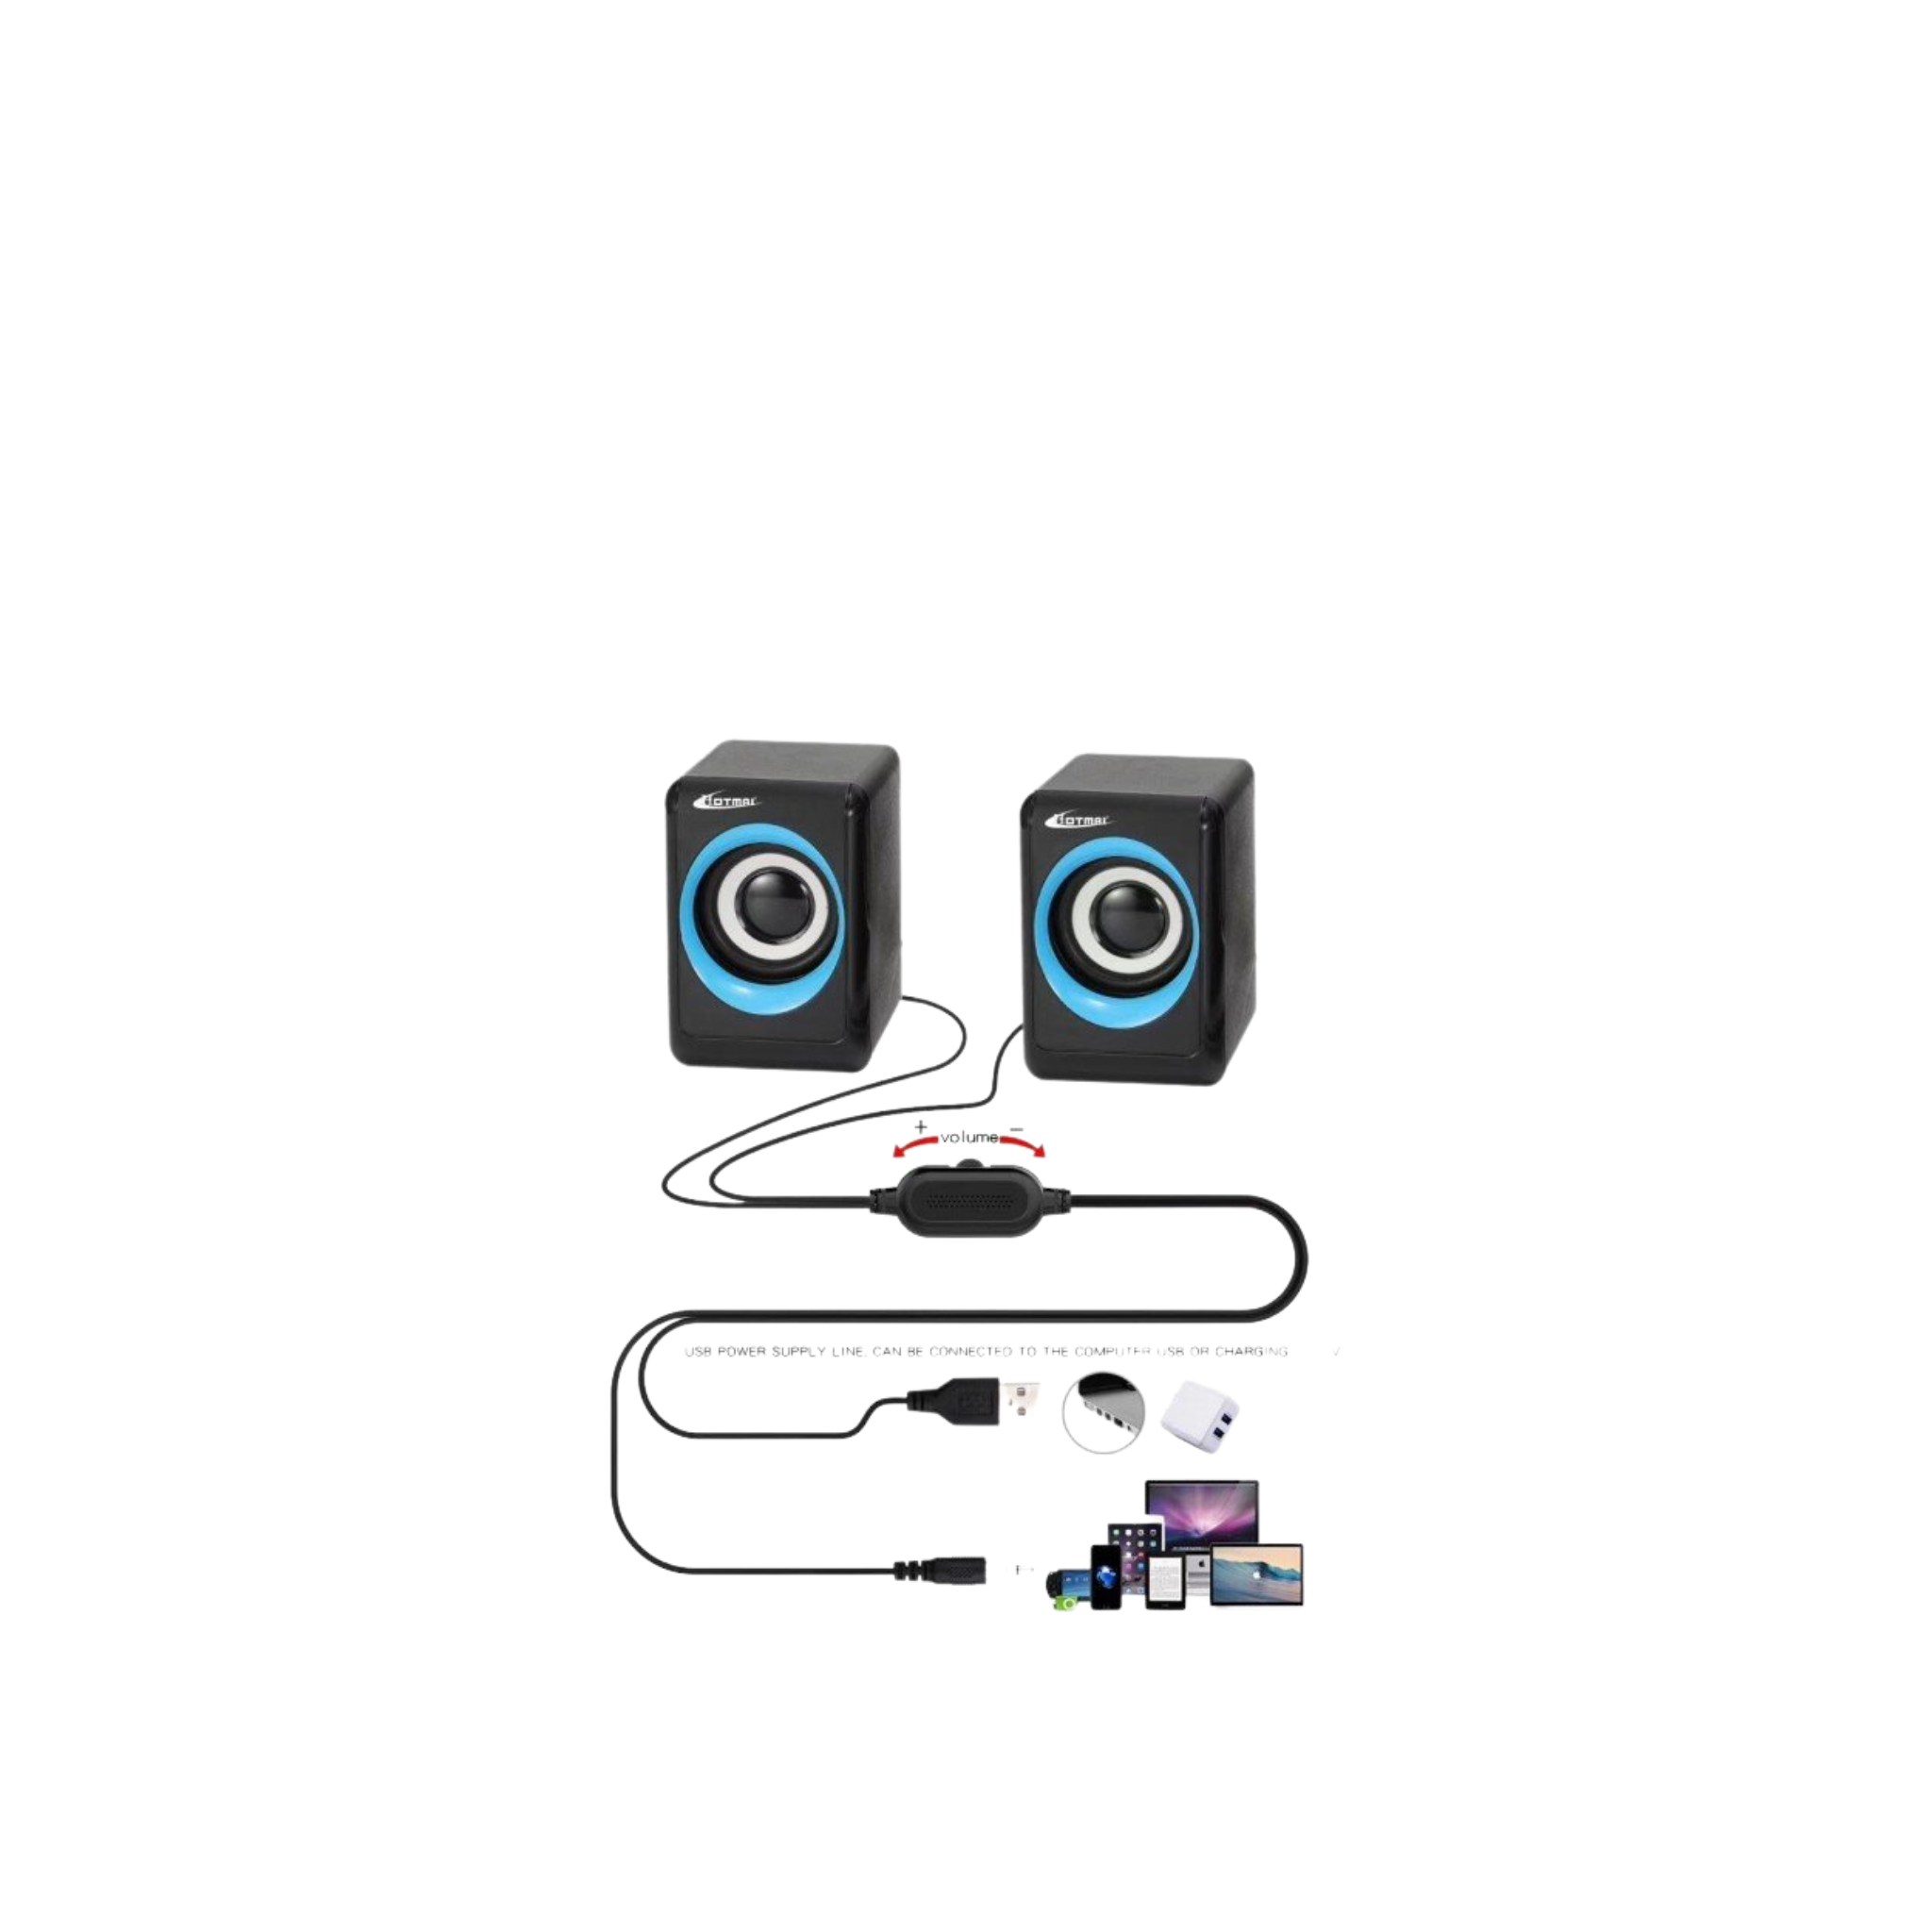 Multimedia Speaker, Best Sound Quality, for Laptop, Computer & LCD